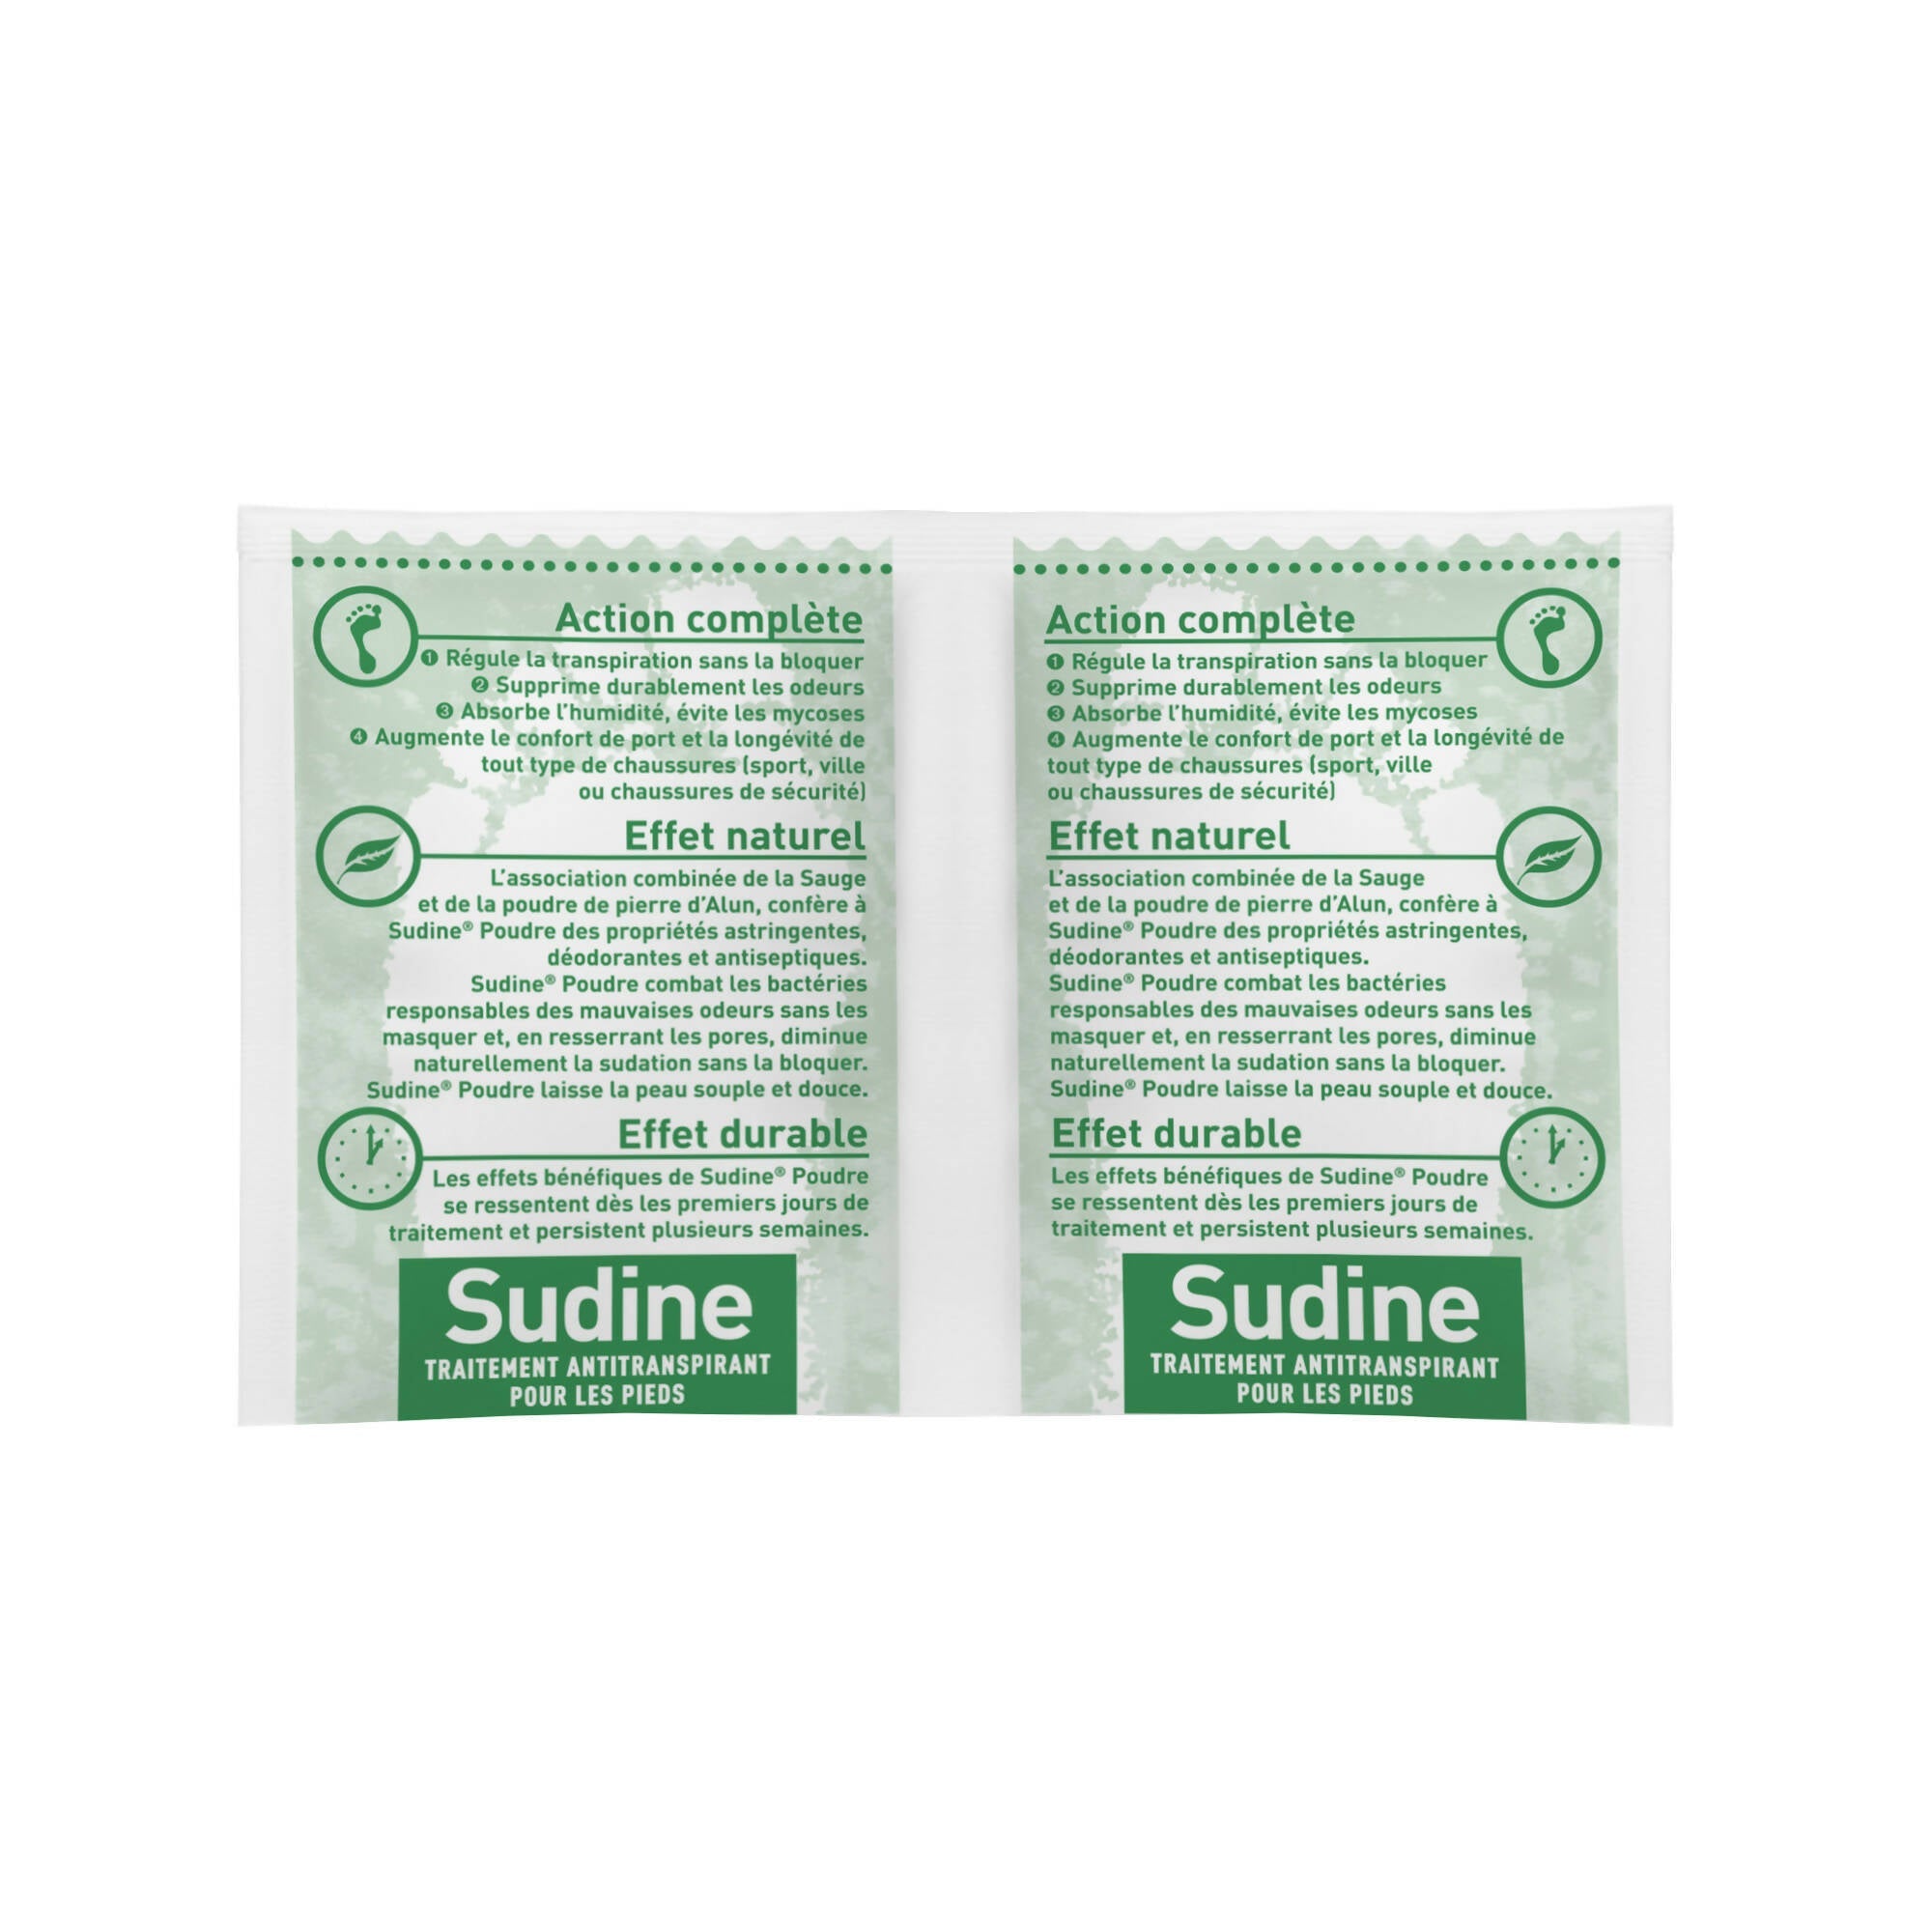 SORIFA - Complete box of 80 - Sudine Antiperspirant Treatment Powder - Foot - Regulates perspiration - Absorbs - Prevents mycoses - Without aluminum salts - Made in France - Box of 6 double sachets